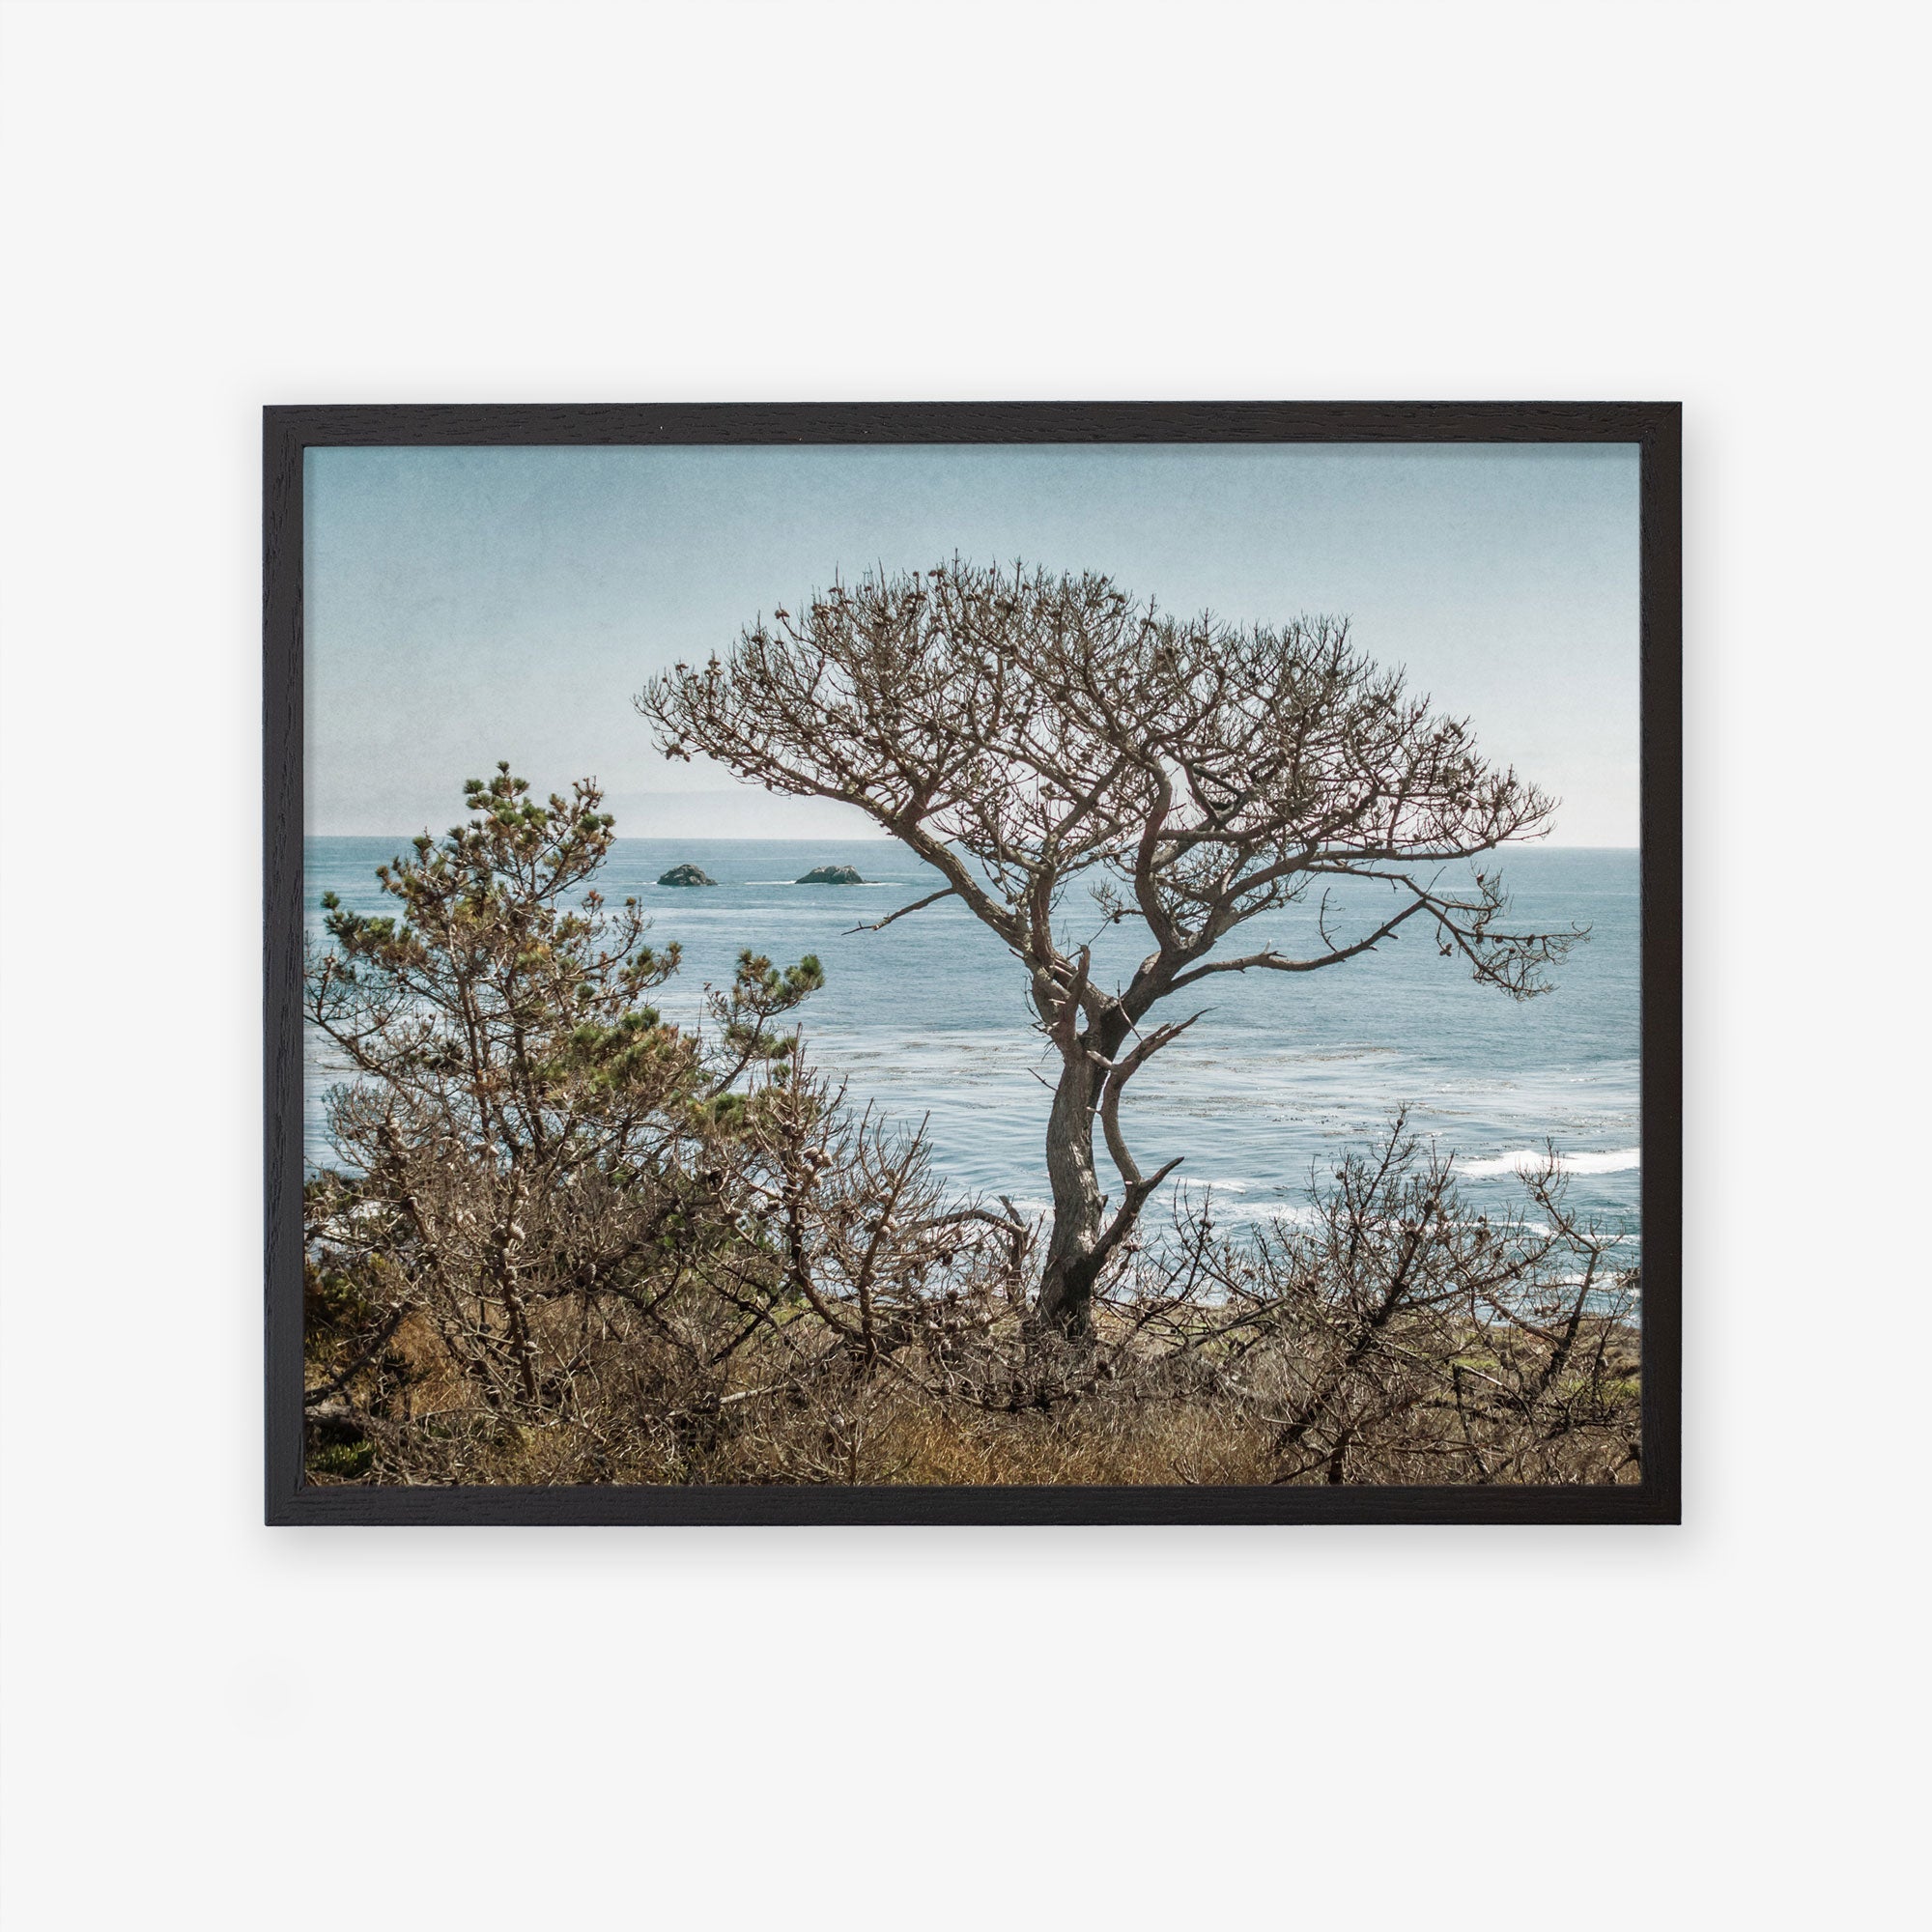 A framed photo of a windswept tree on a coastline overlooking the ocean, with distant rocks visible in the water under a clear sky, captured in Big Sur - Offley Green&#39;s California Landscape Art in Big Sur, &#39;Wind Blown Tree.&#39;